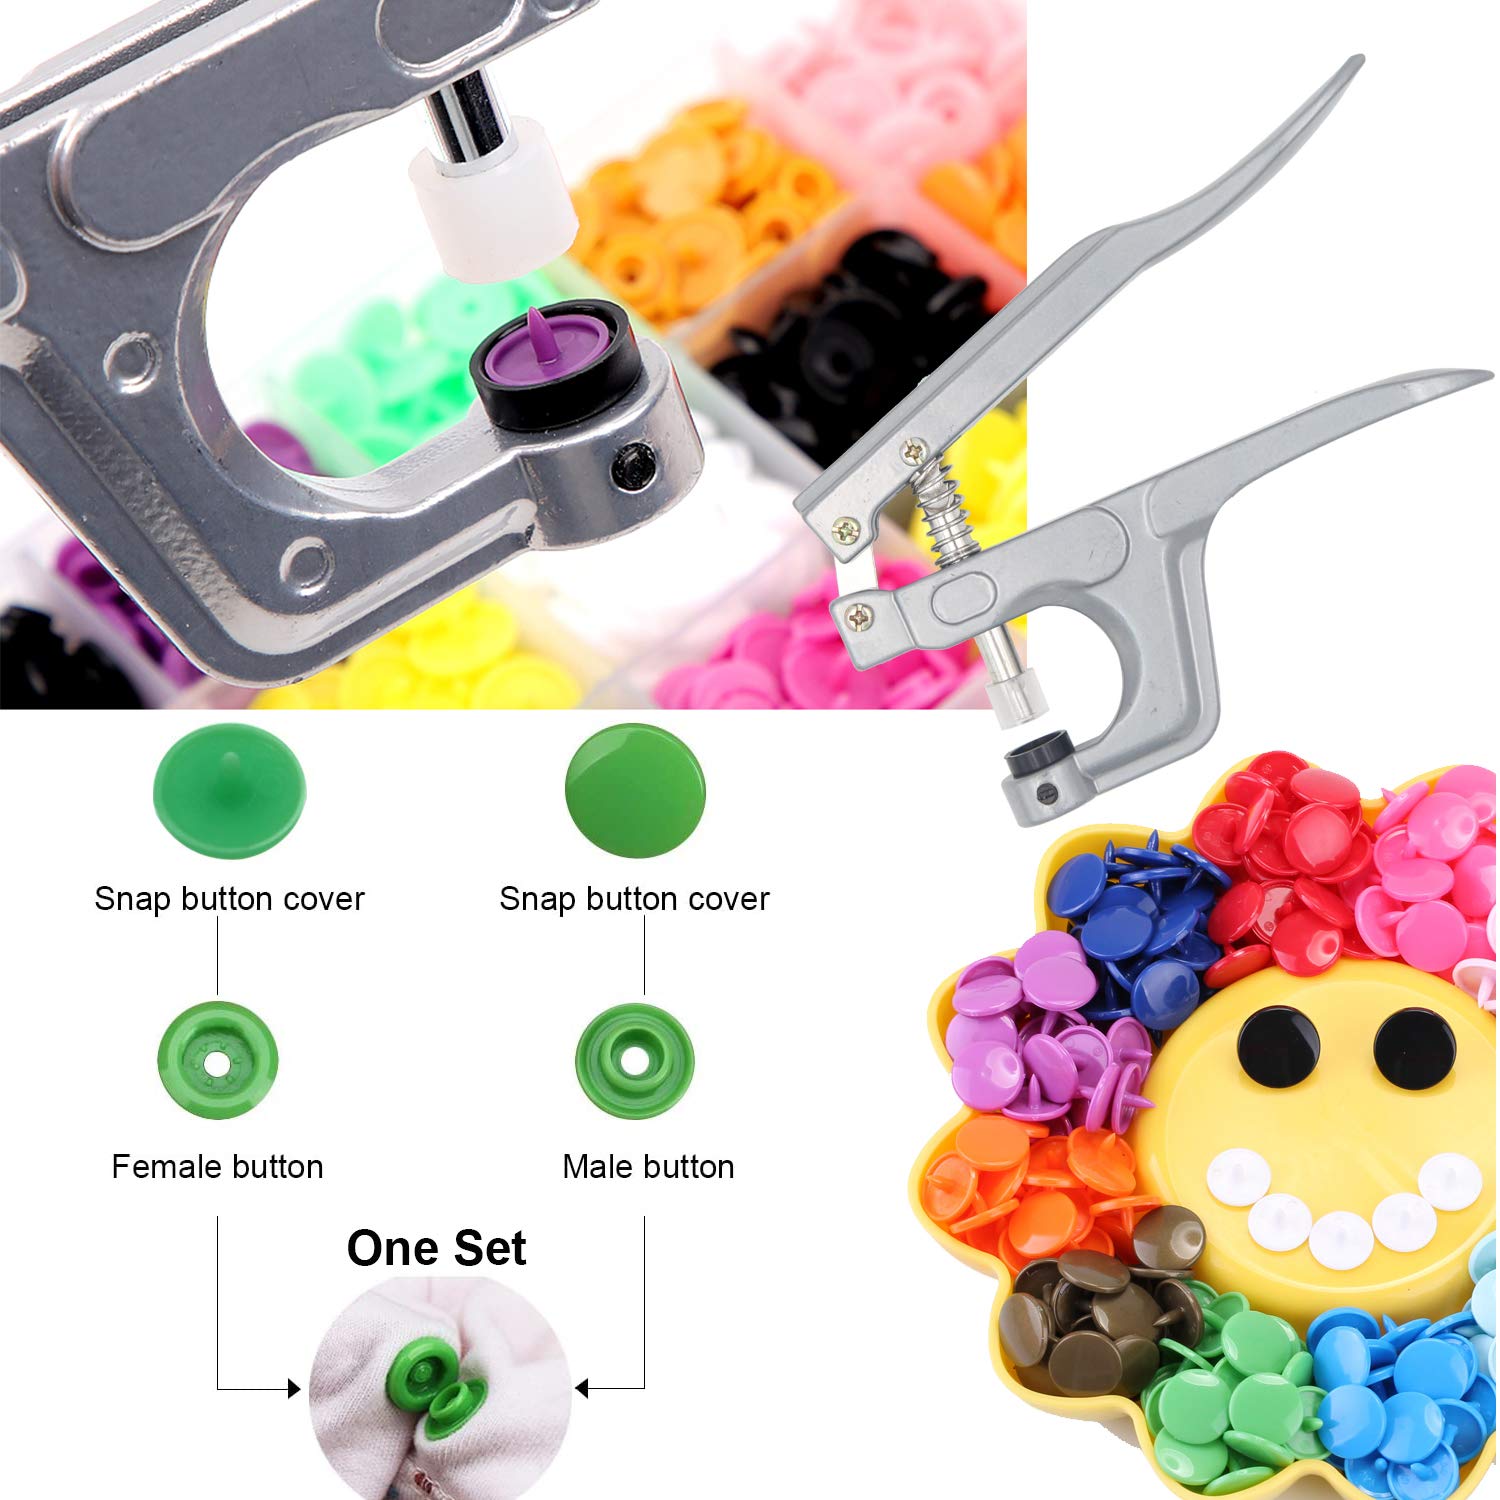 No-Sew Plastic Snap Buttons - T5 Snap Button Kit - Snap Fastener Kit with  Tools for Fabric Sewing Clothes 360 Sets